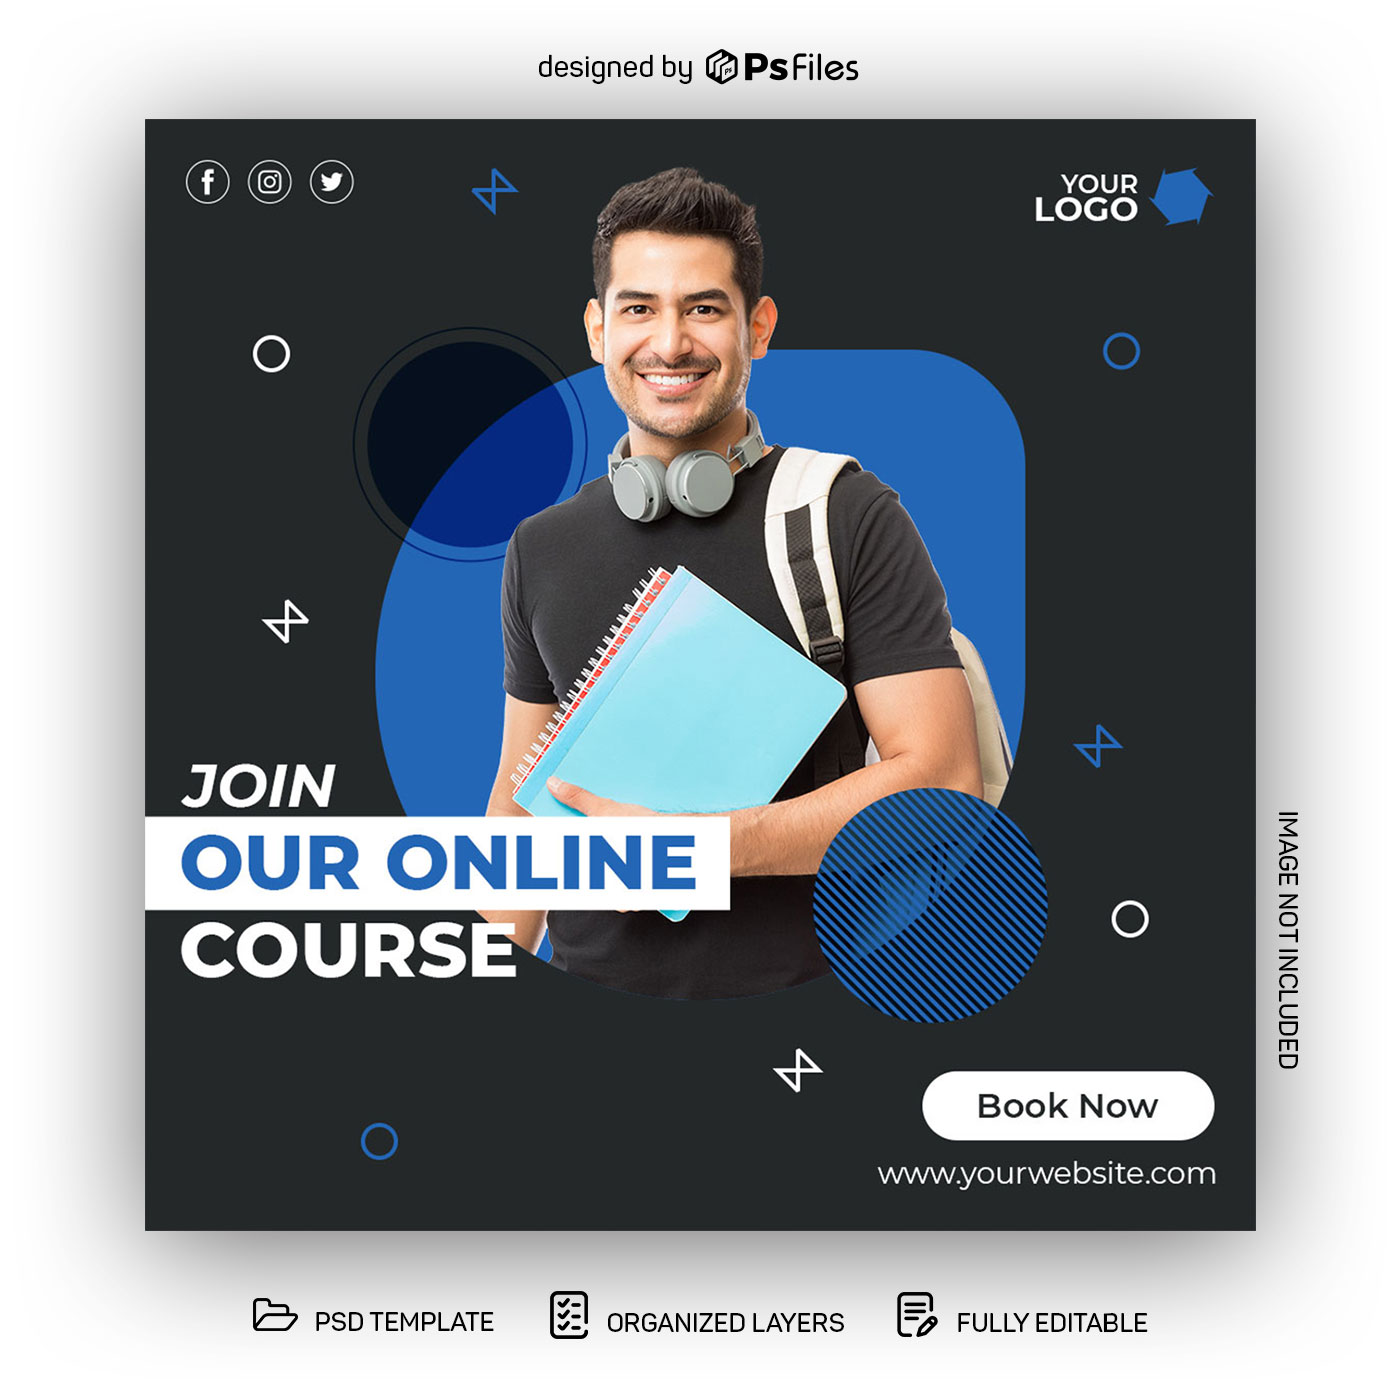 Free Online Course Social Media Post Design PSD Template